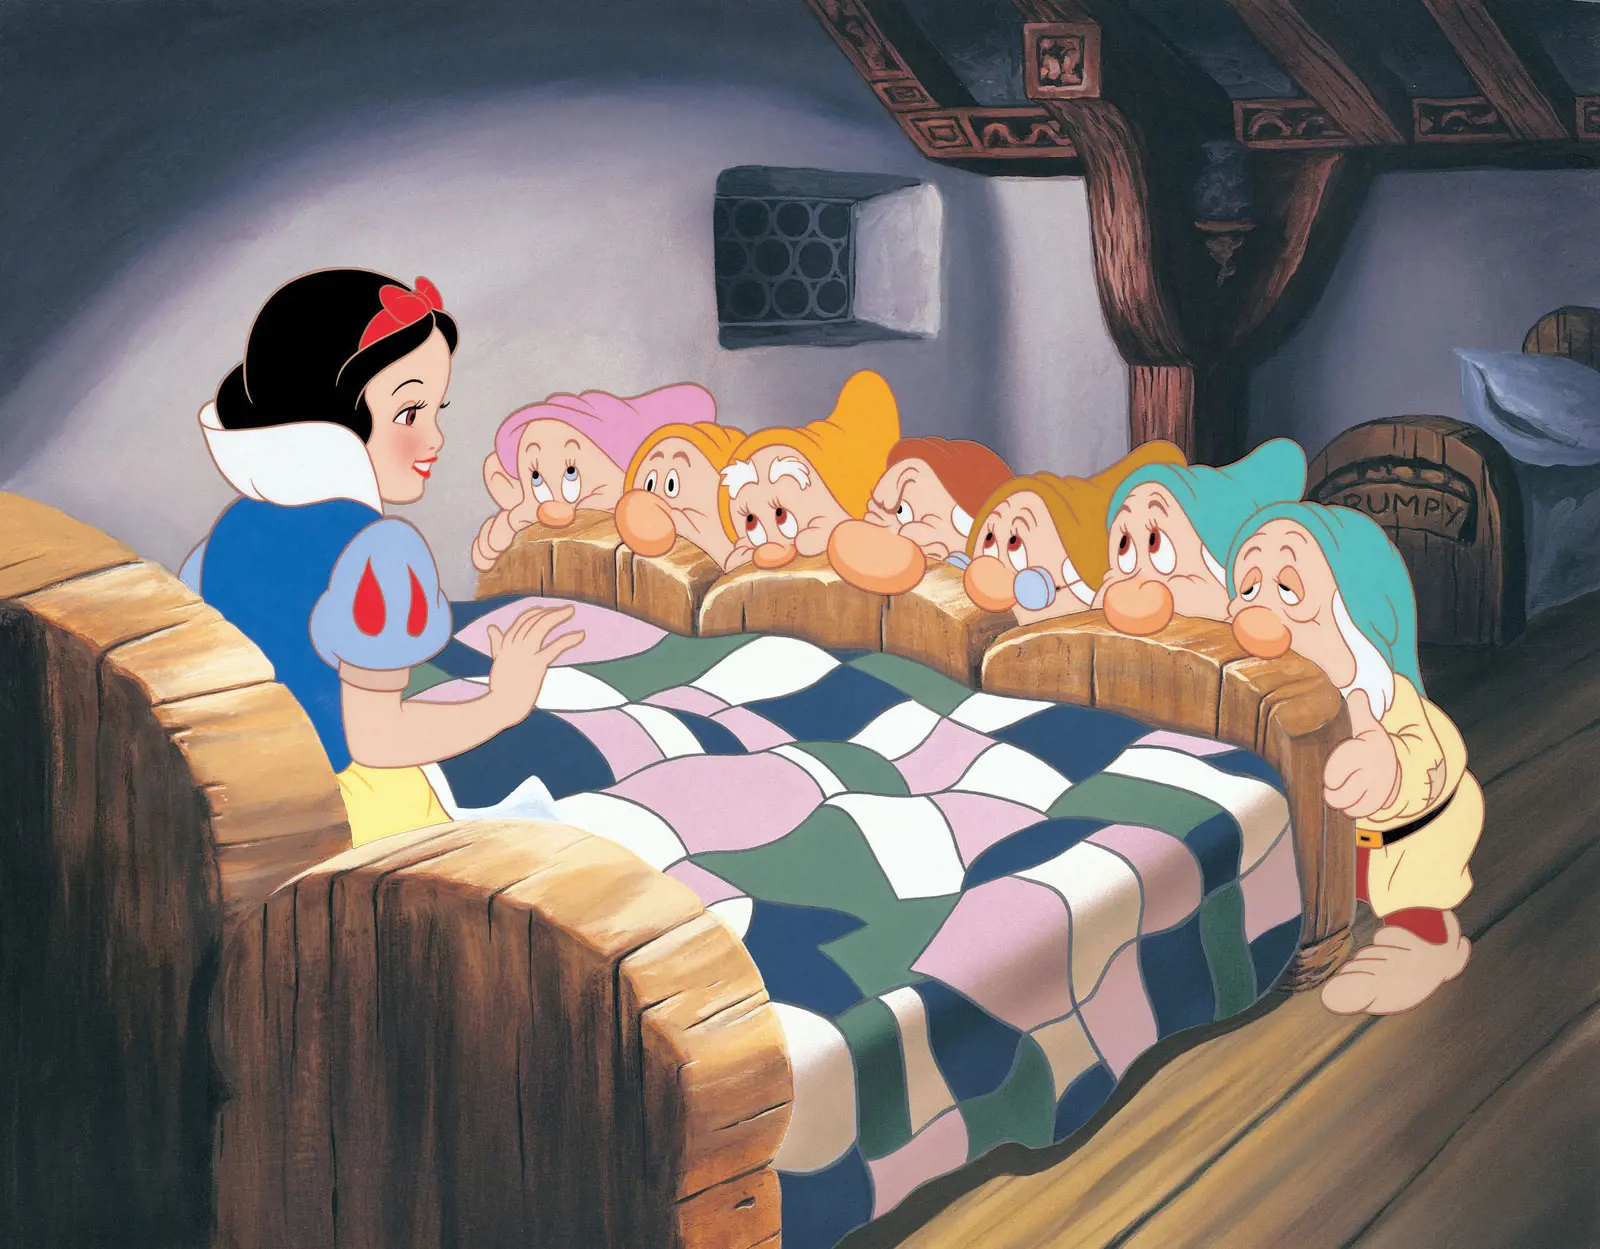 On 21 December, 1937, Snow 'White' and the Seven Dwarfs was premiered in Los Angeles, California